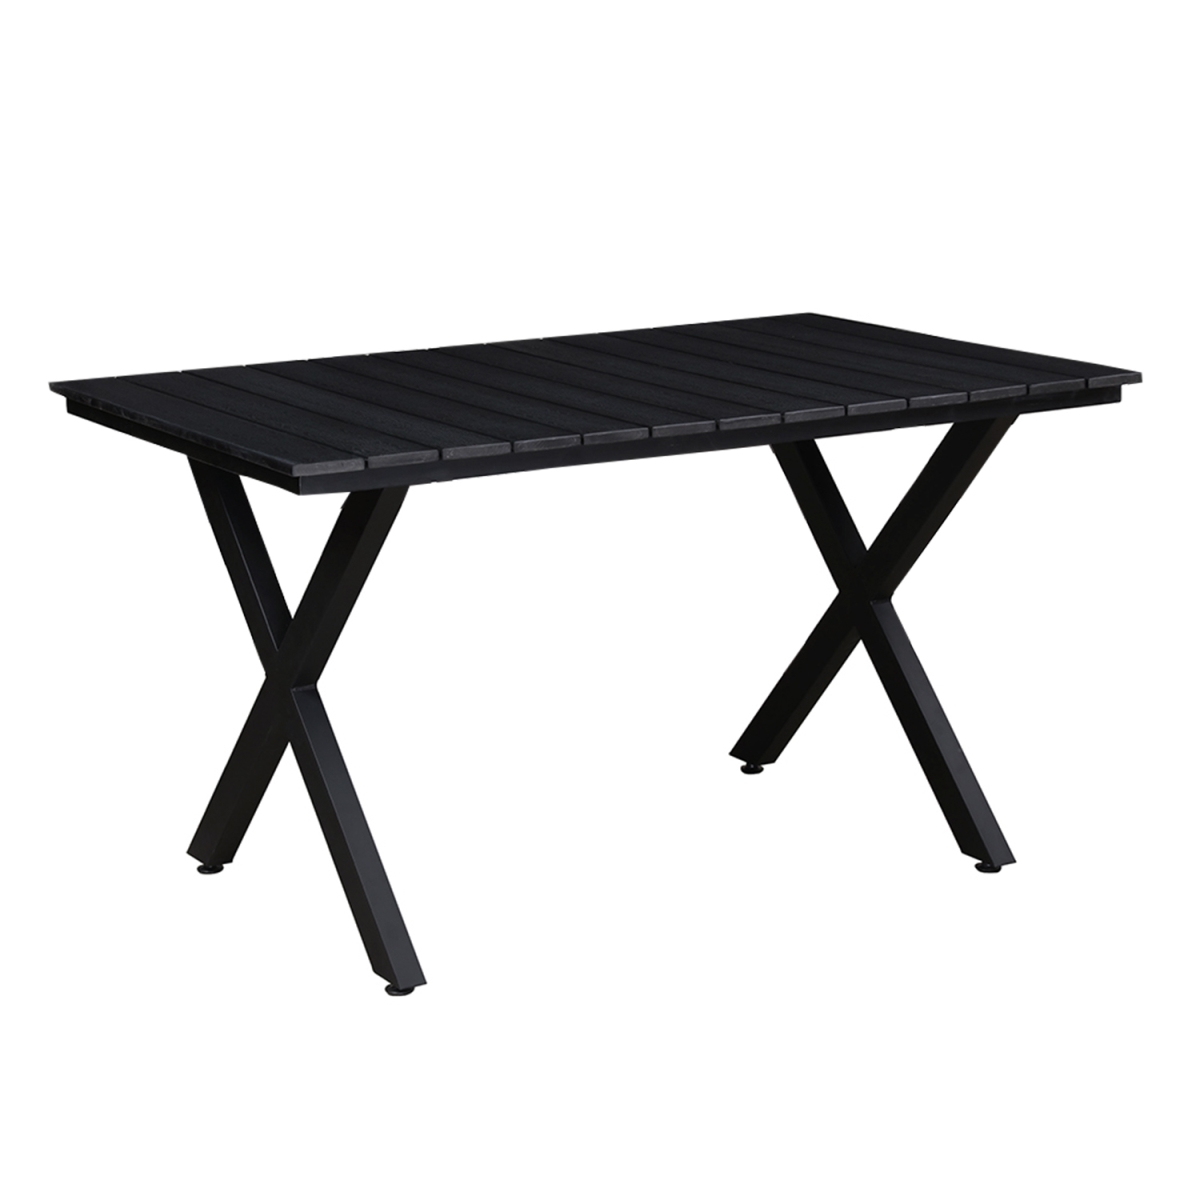 Oakland Living 902-table-bk 51 In. Indoor & Outdoor Rectangular Modern Contemporary Faux Wood Slatted Steel Dining Table, Black